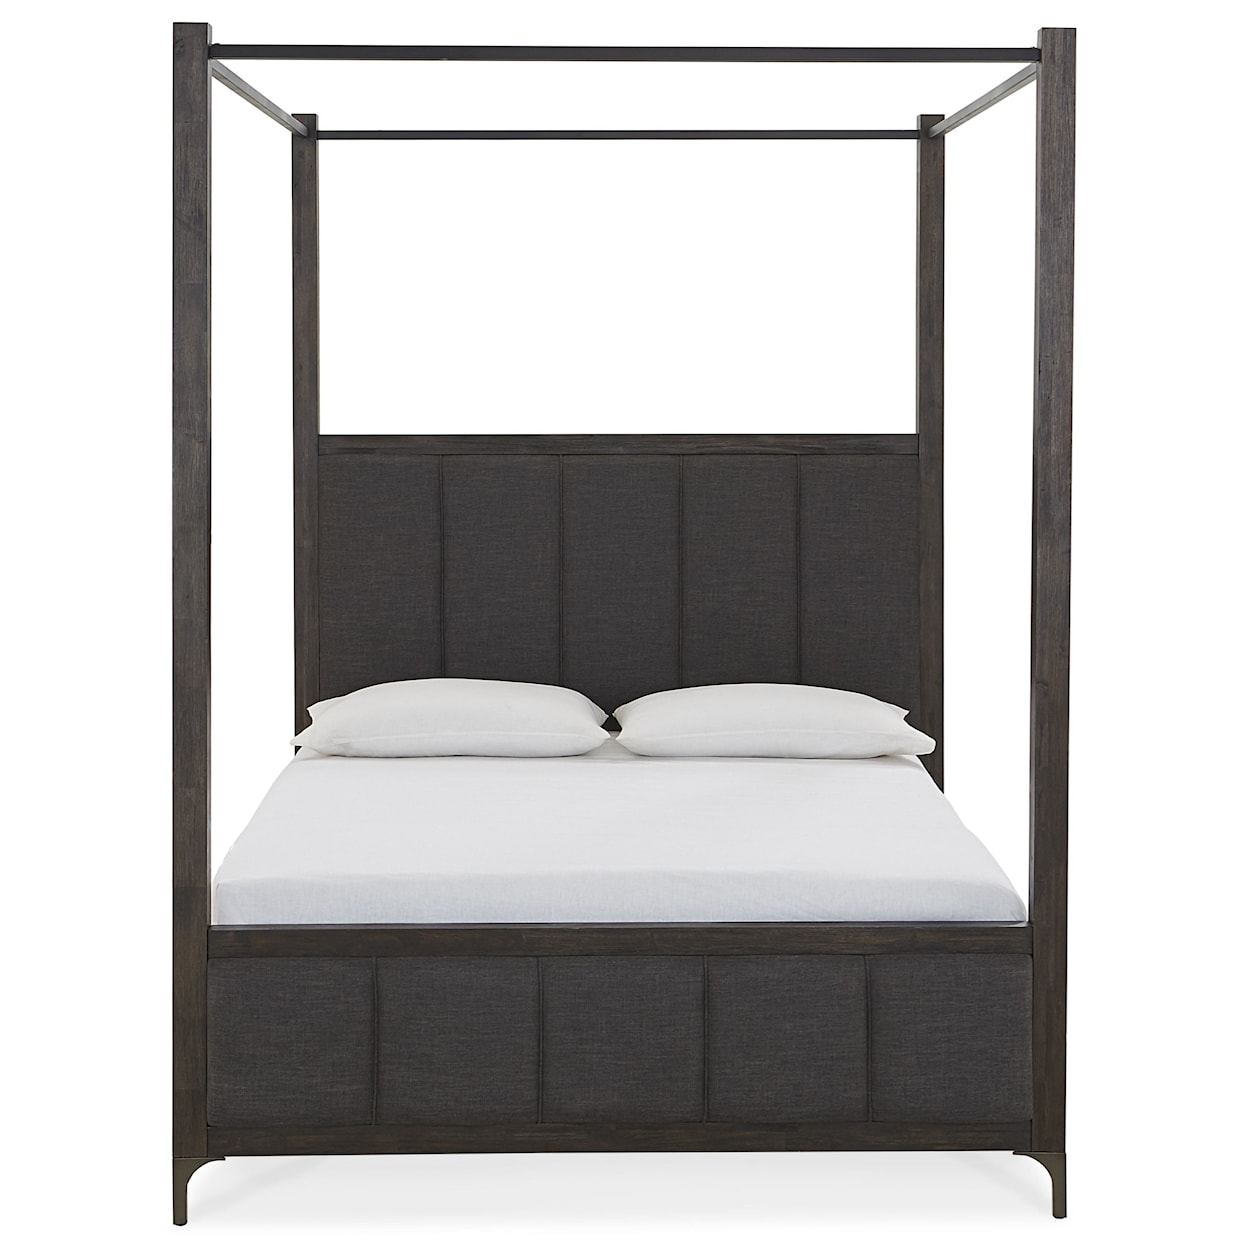 Modus International Lucerne Queen Canopy Bed in Vintage Coffee